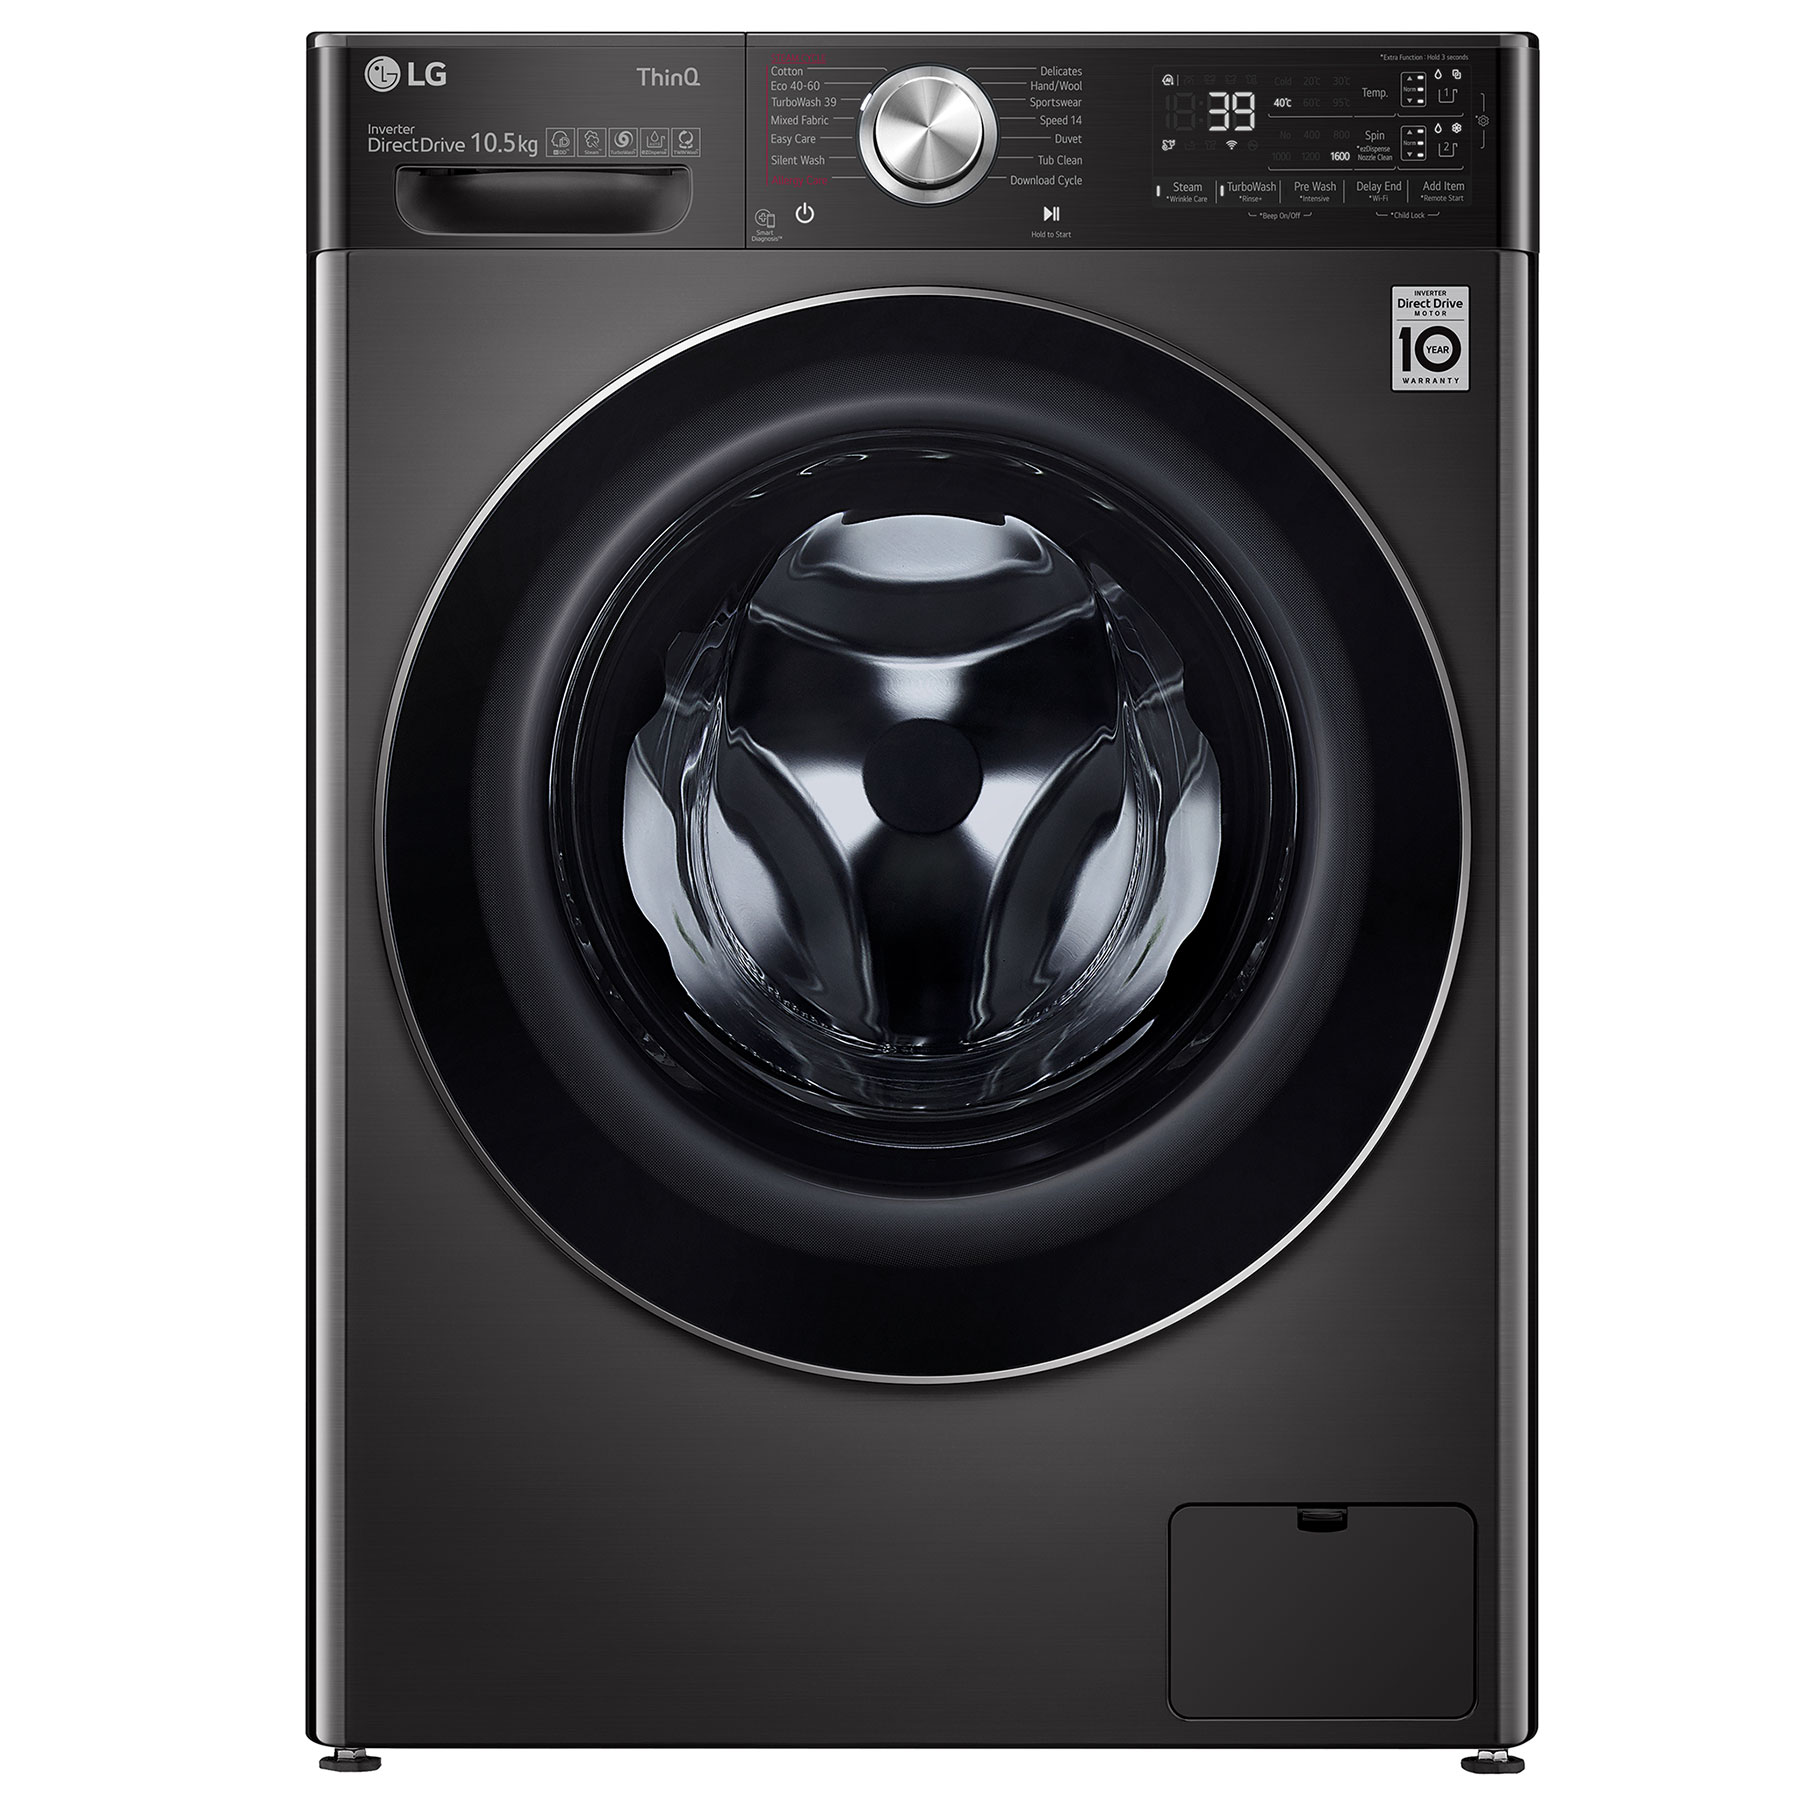 Image of LG F6V1110BTSA Washing Machine in Black Steel 1600rpm 10 5kg A Rated